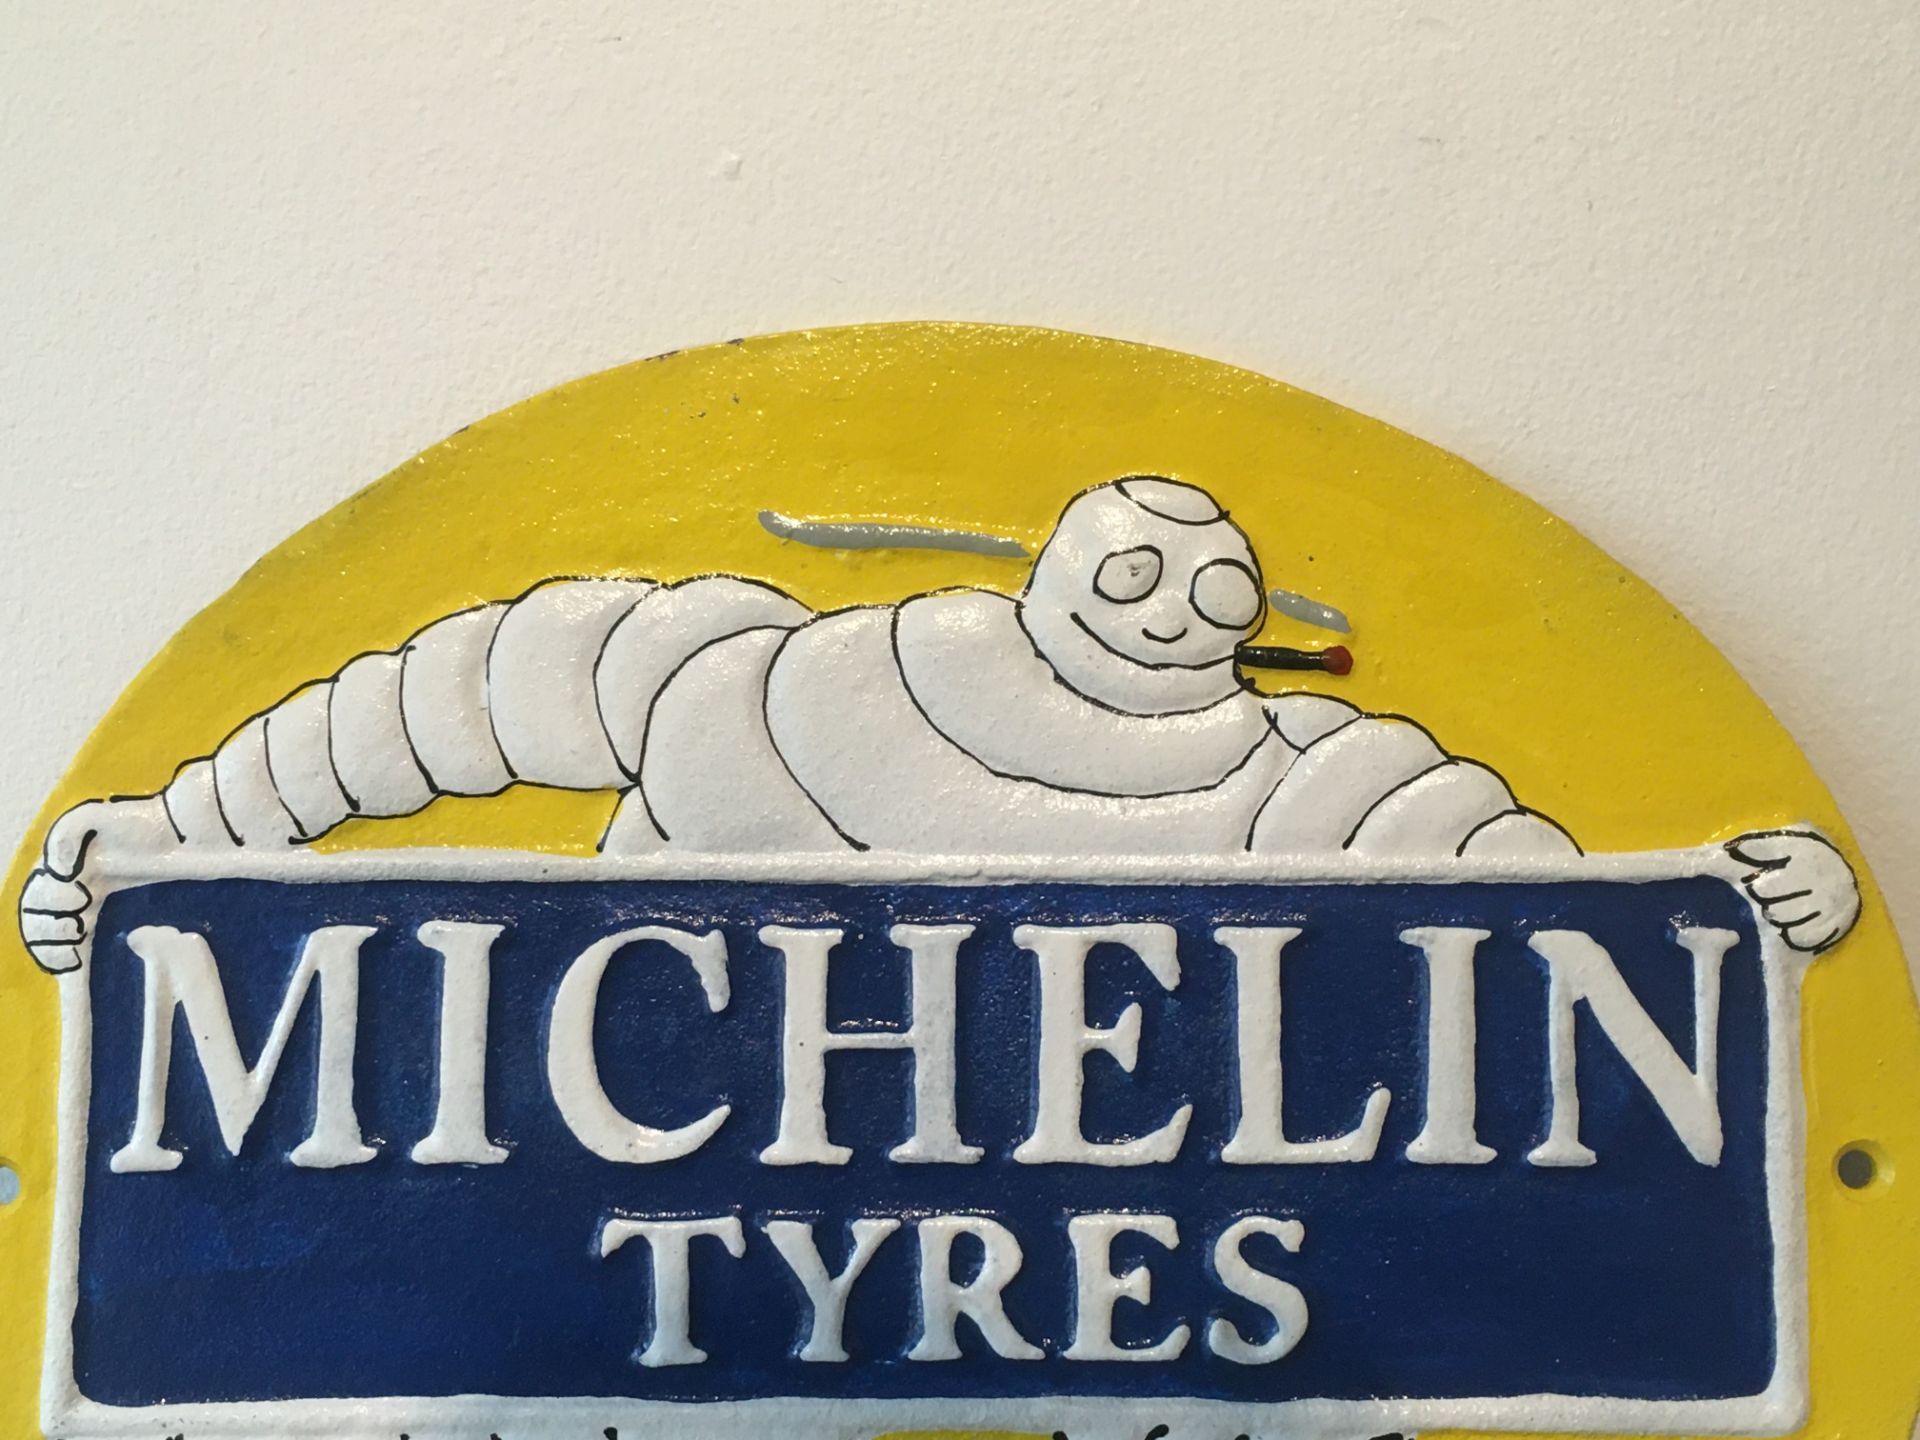 Michelin Tyres Cast Iron Sign - Image 2 of 3